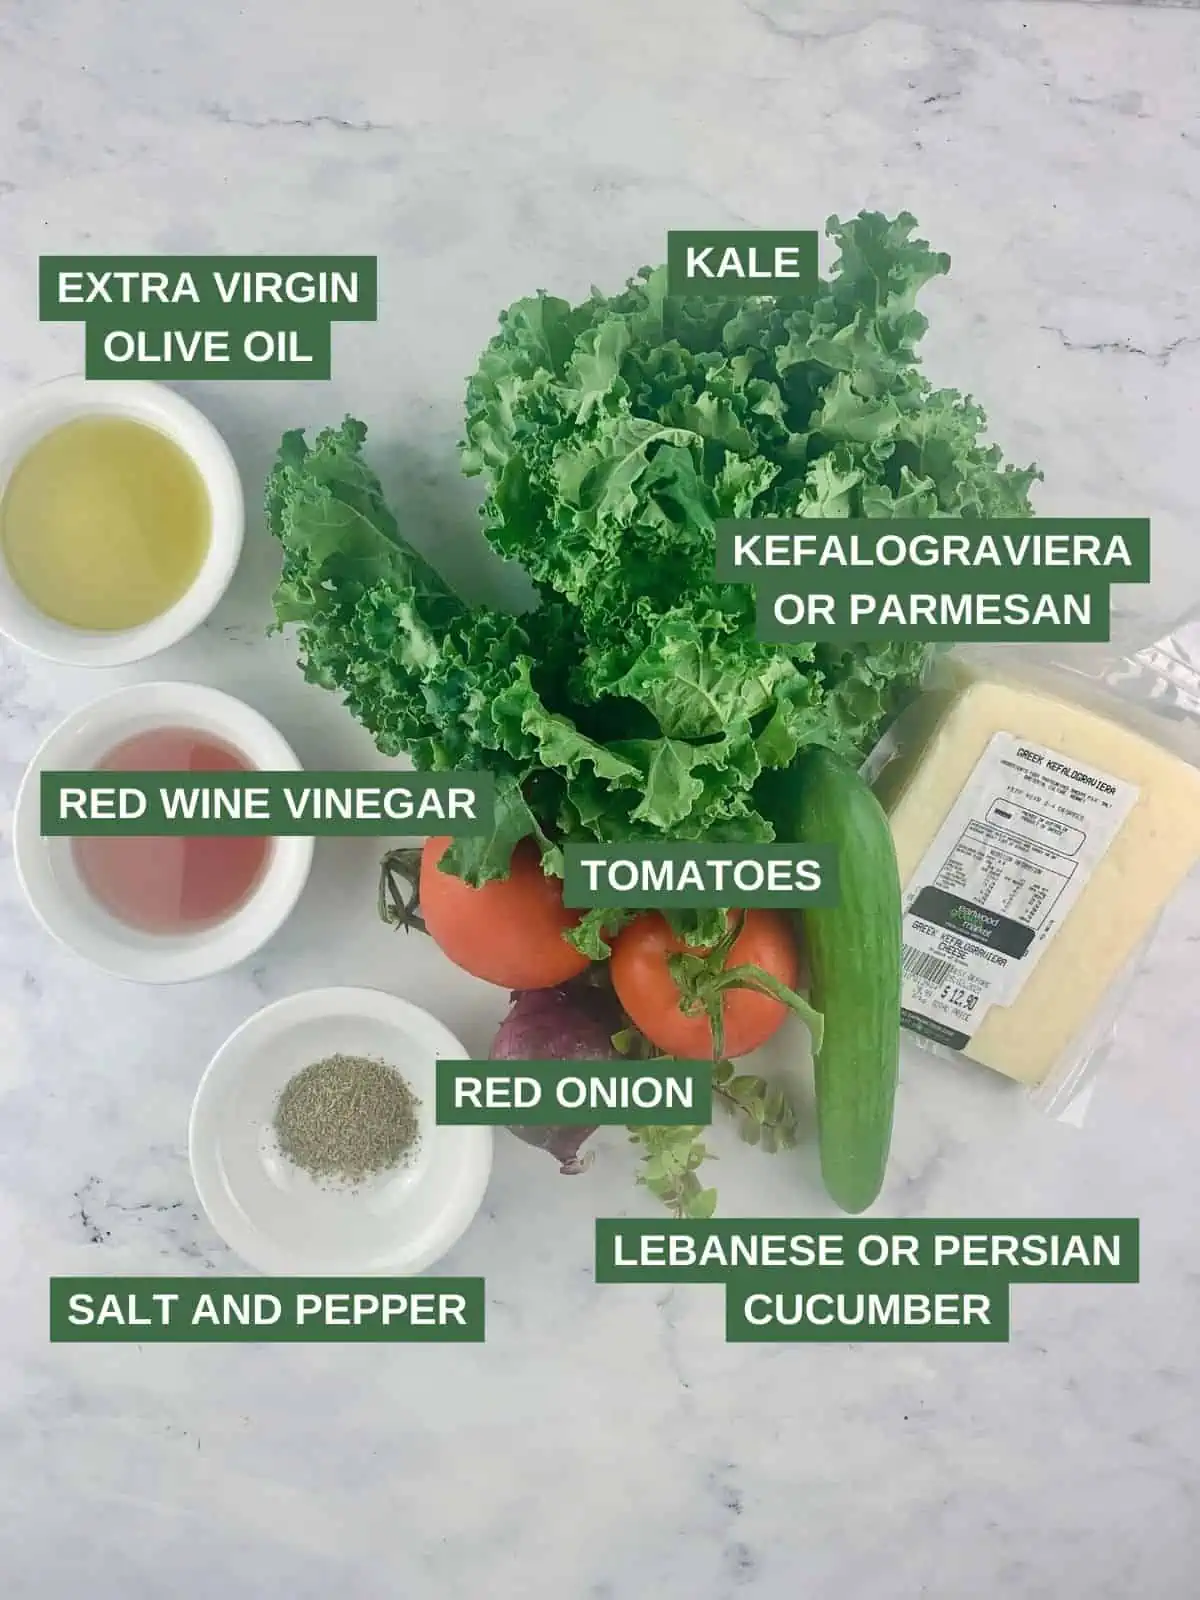 Labelled ingredients needed to make a chopped kale salad.